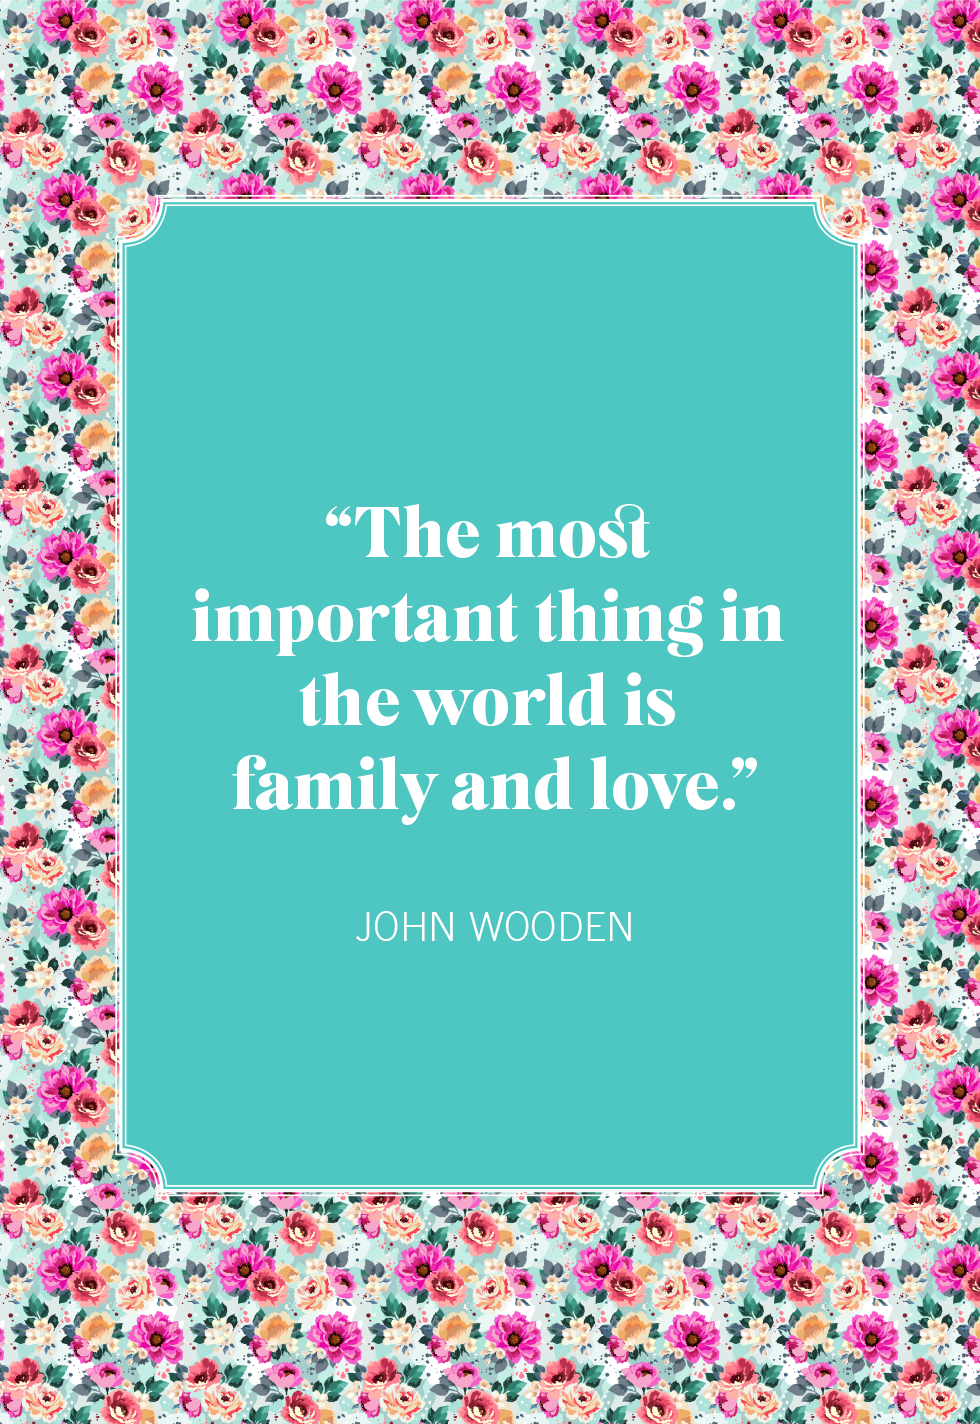 60 Best Family Quotes - 'I Love My Family' Sayings